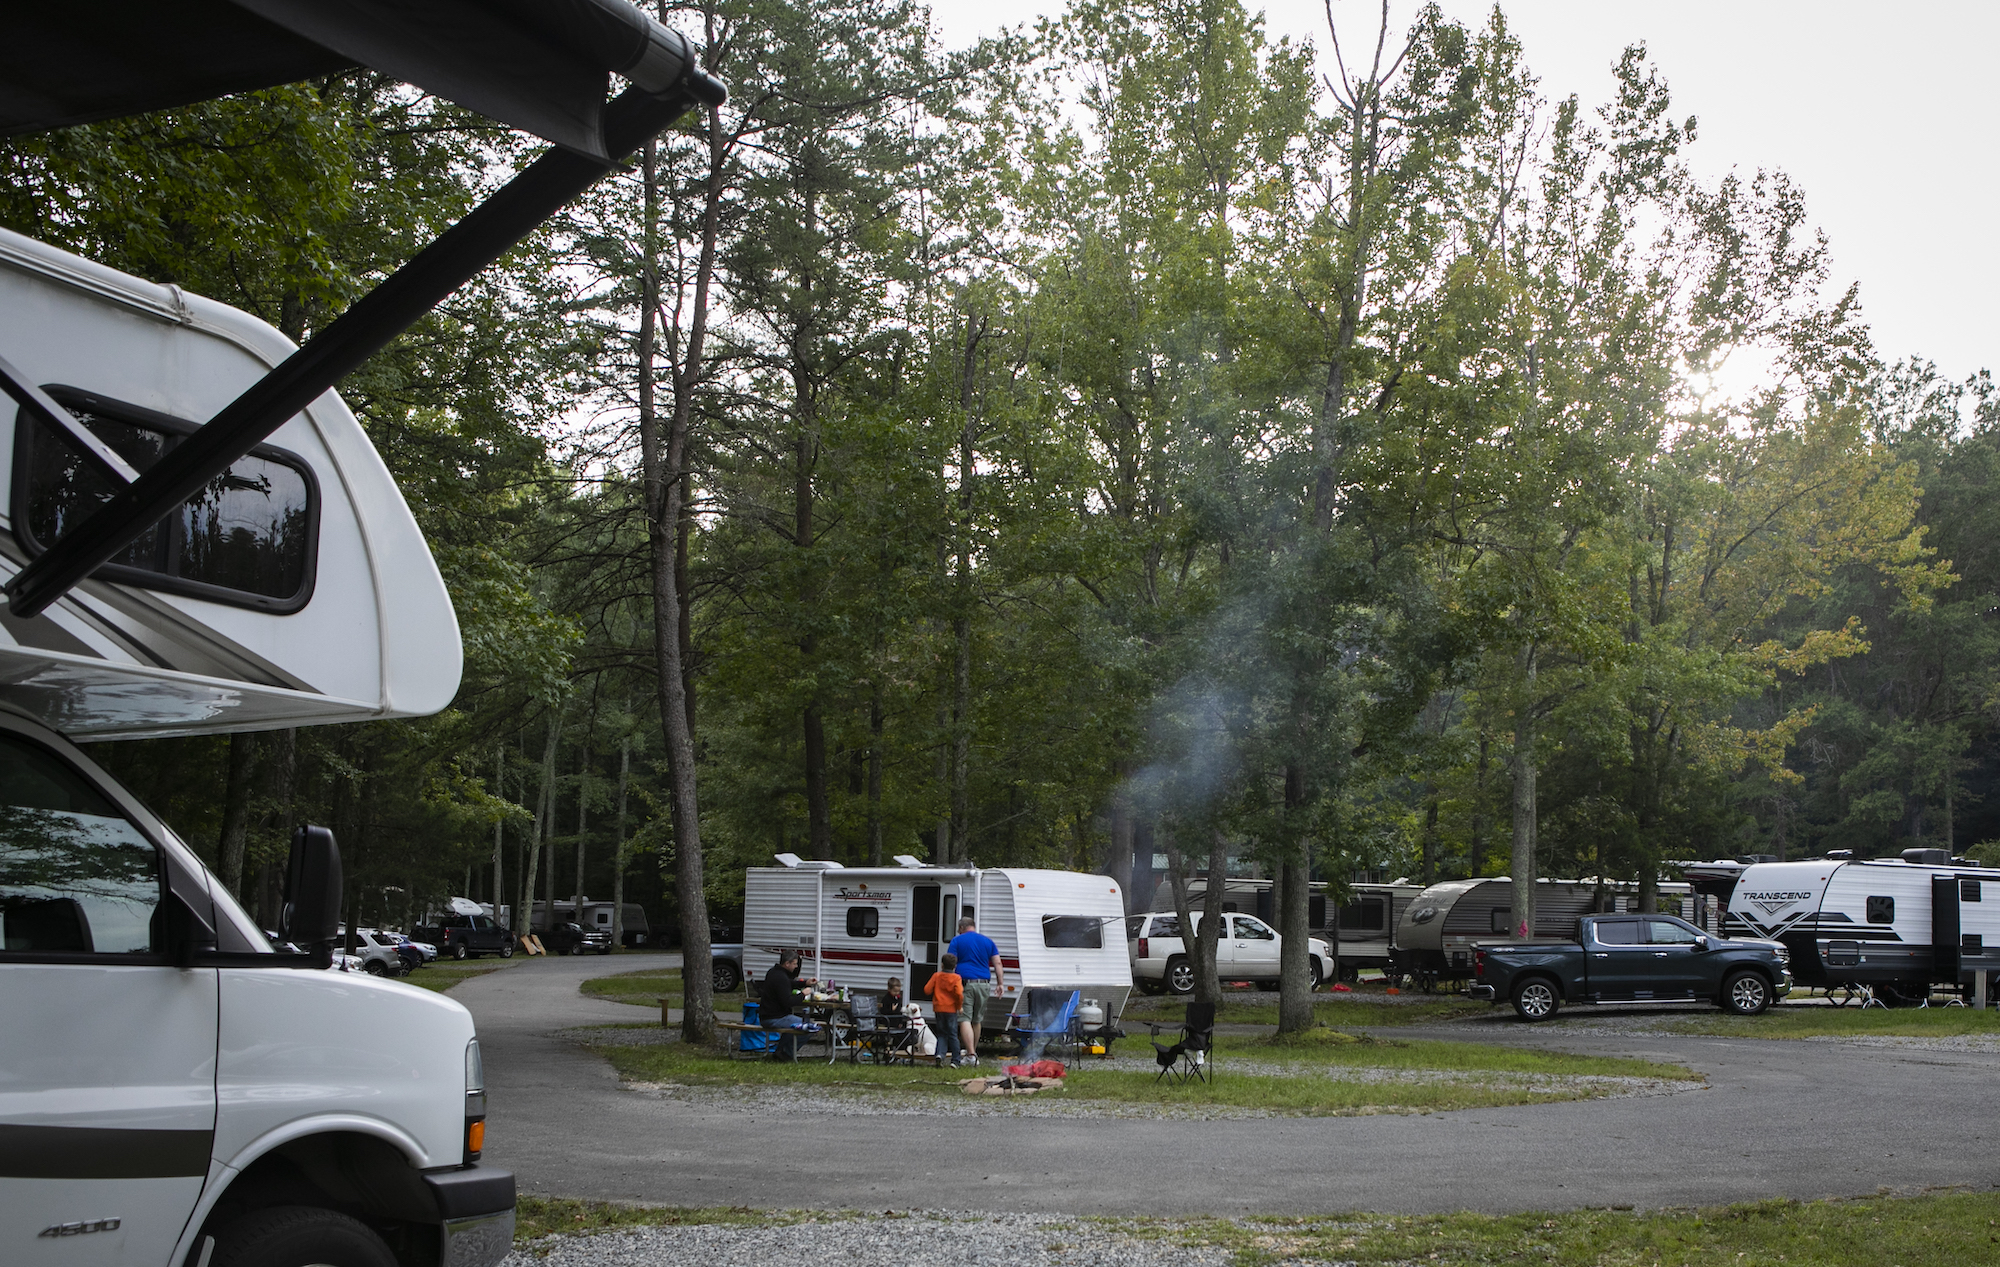 RV campers make a fire at a KOA campground in Fredericksburg, Virginia, on Saturday, September 19, 2020